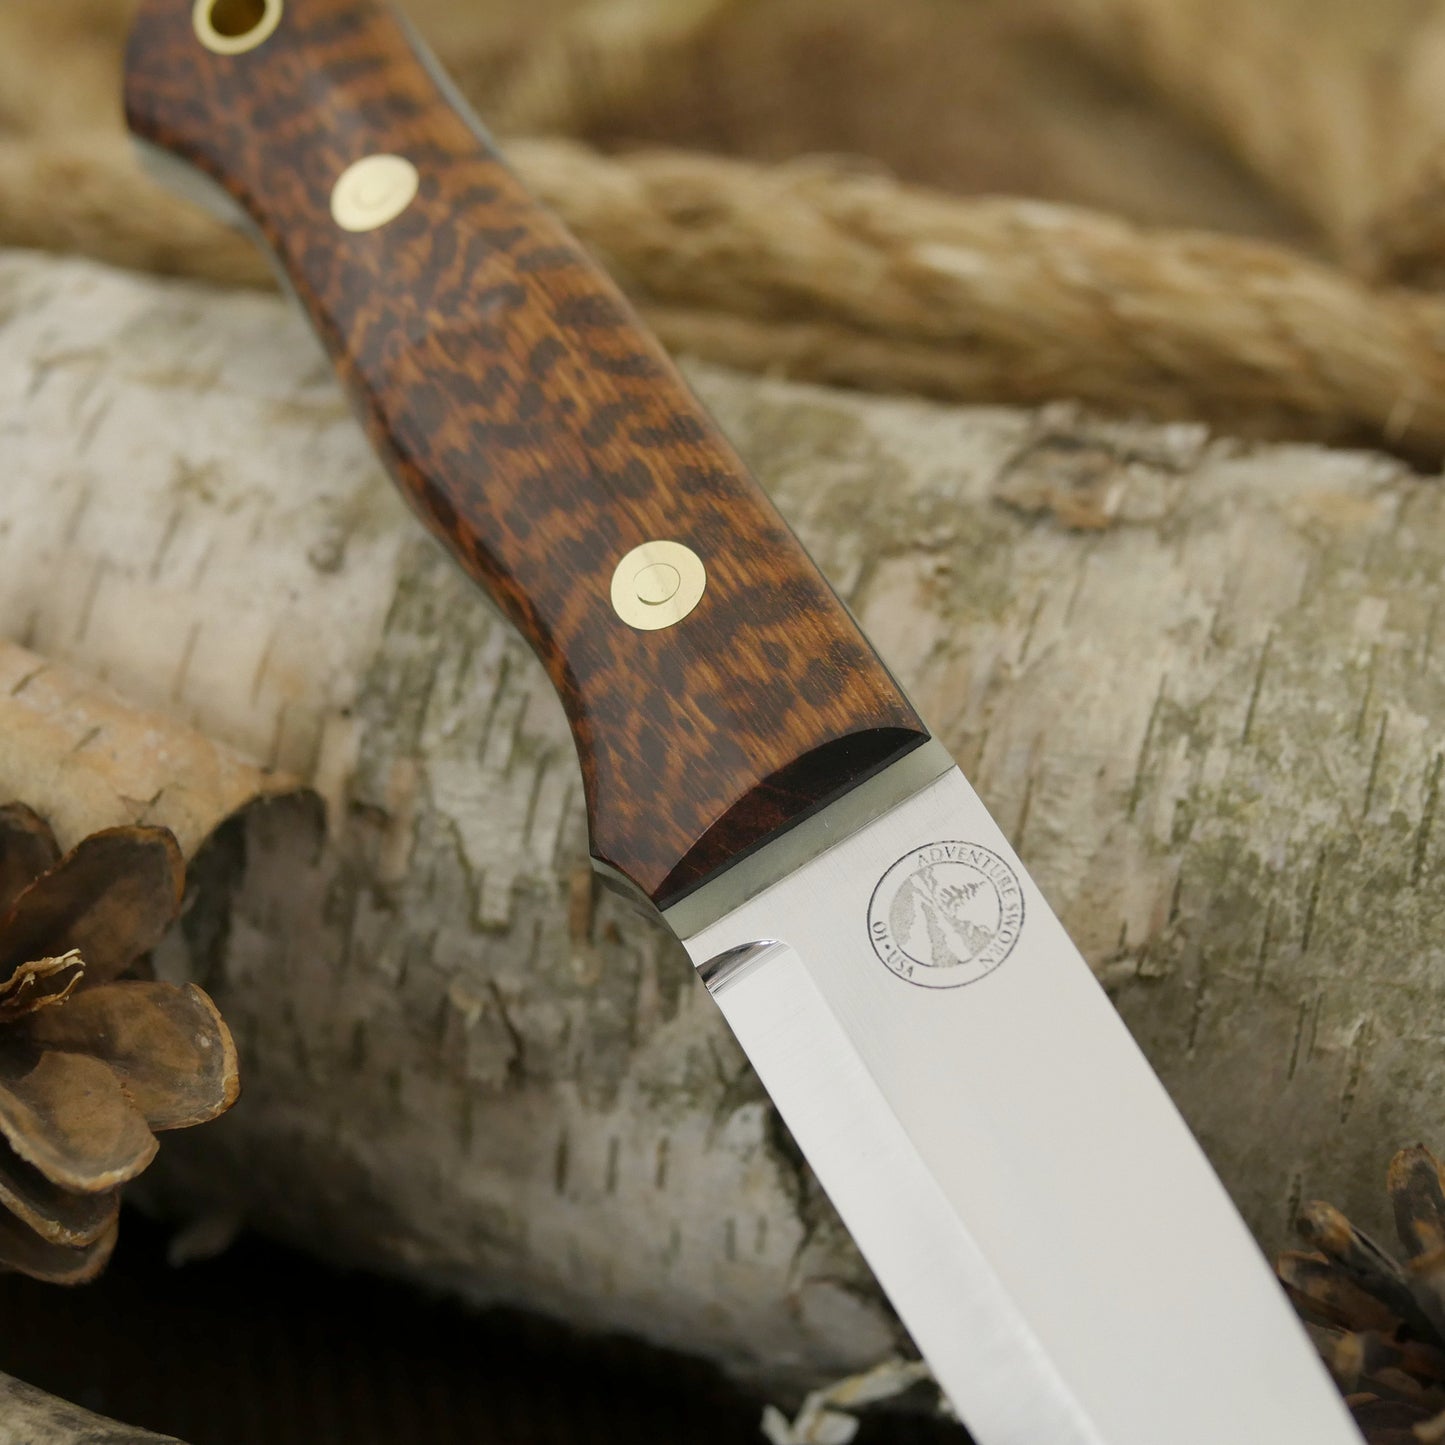 Classic: Snakewood & Moonglow